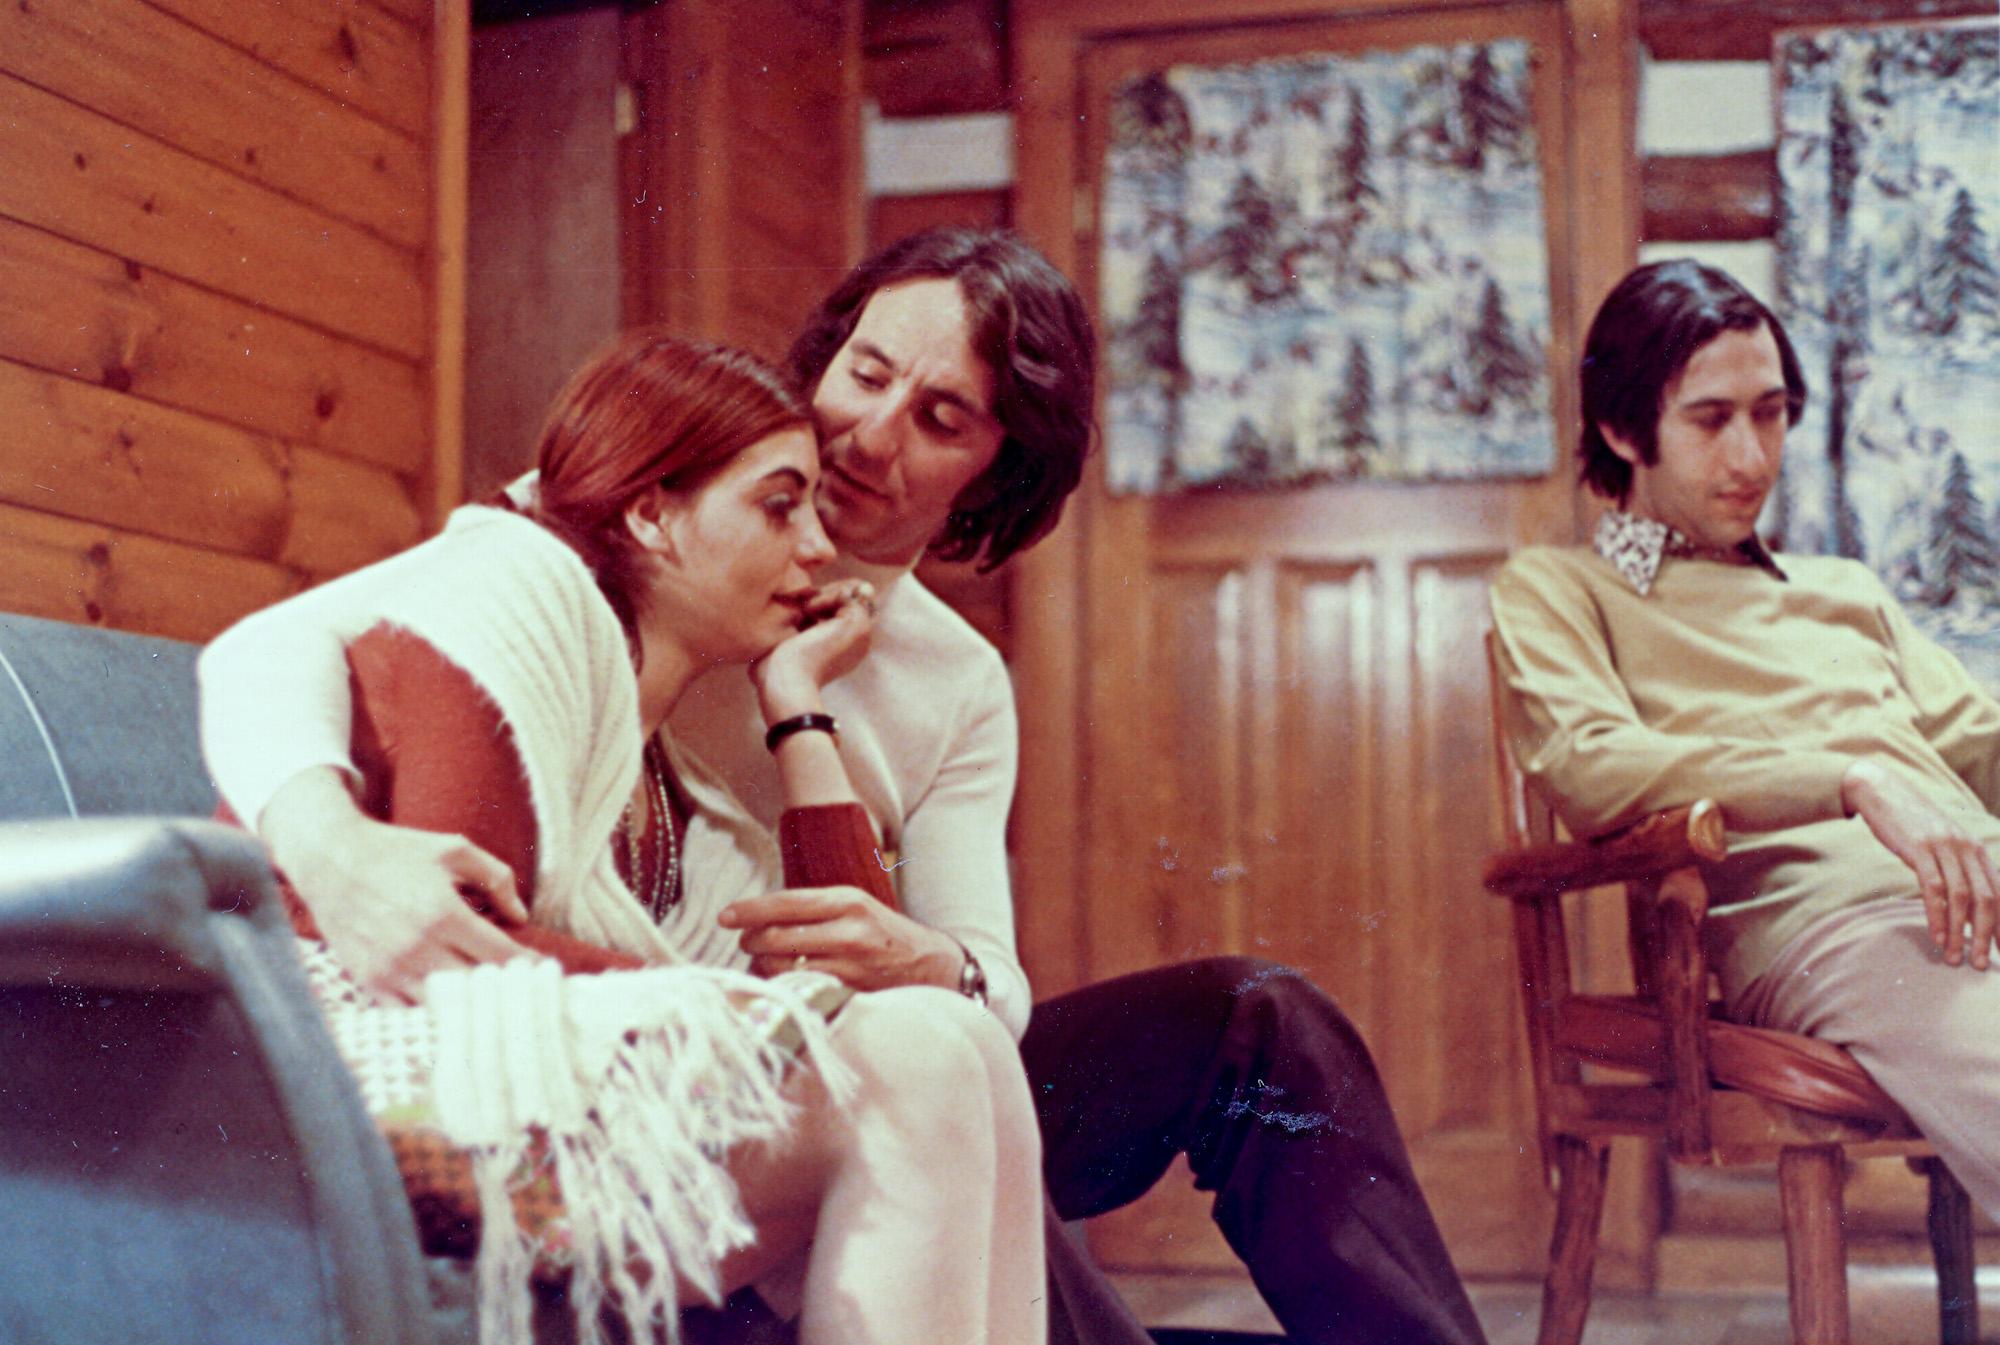 Ontario, Canada, May 1971. View full size.